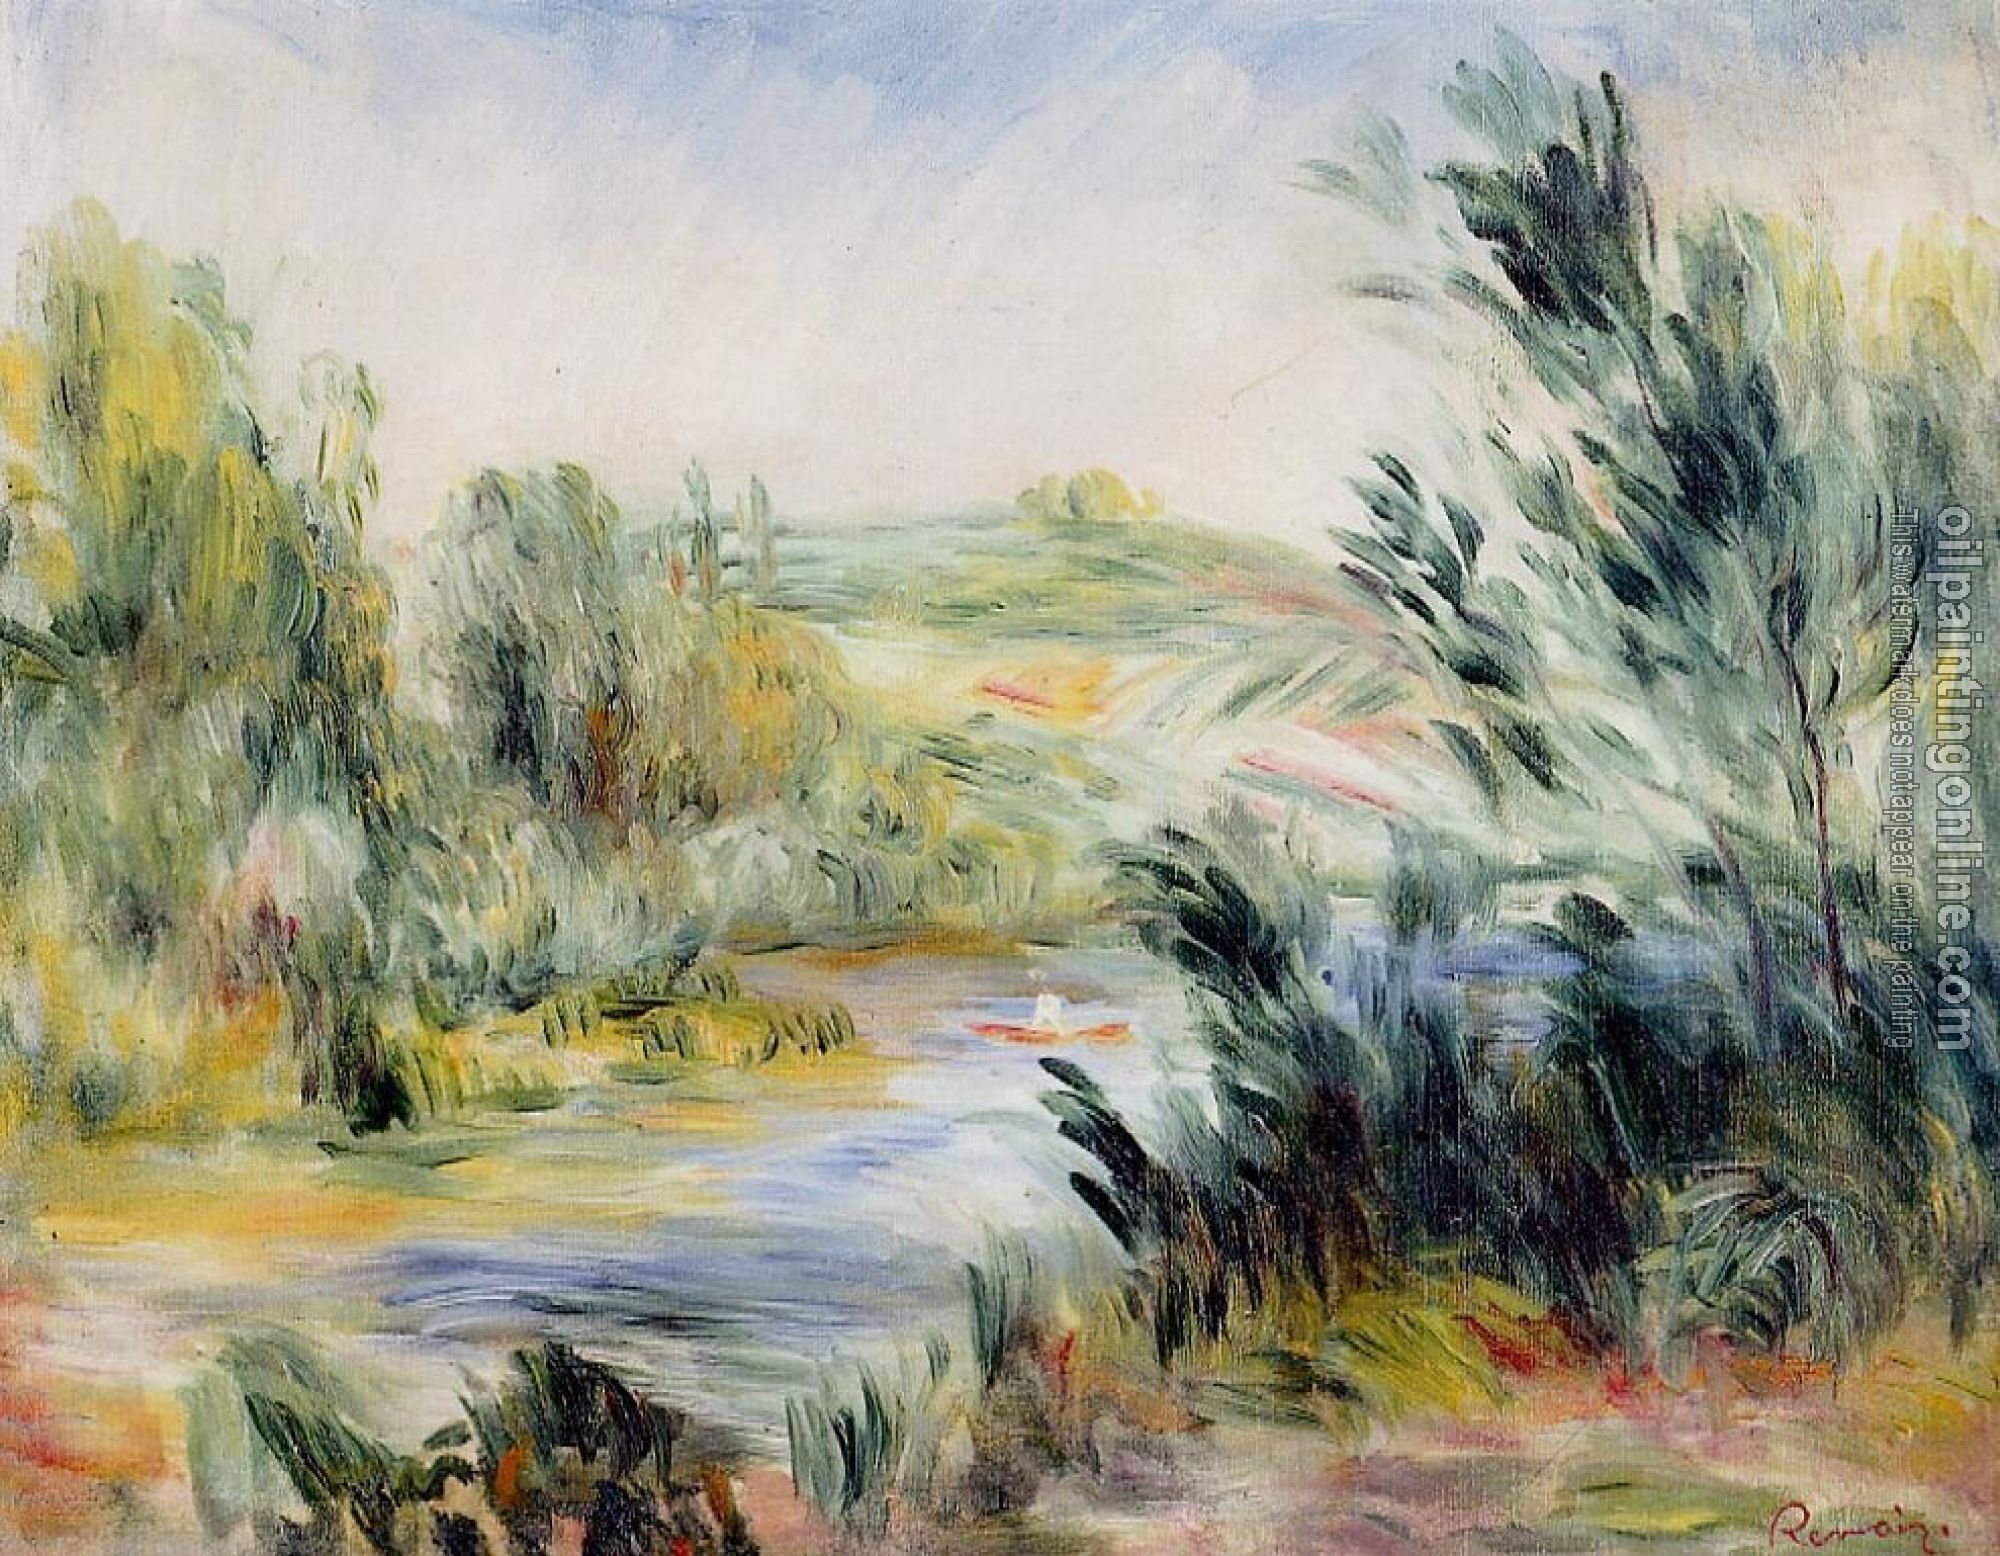 Renoir, Pierre Auguste - The Banks of a River, Rower in a Boat